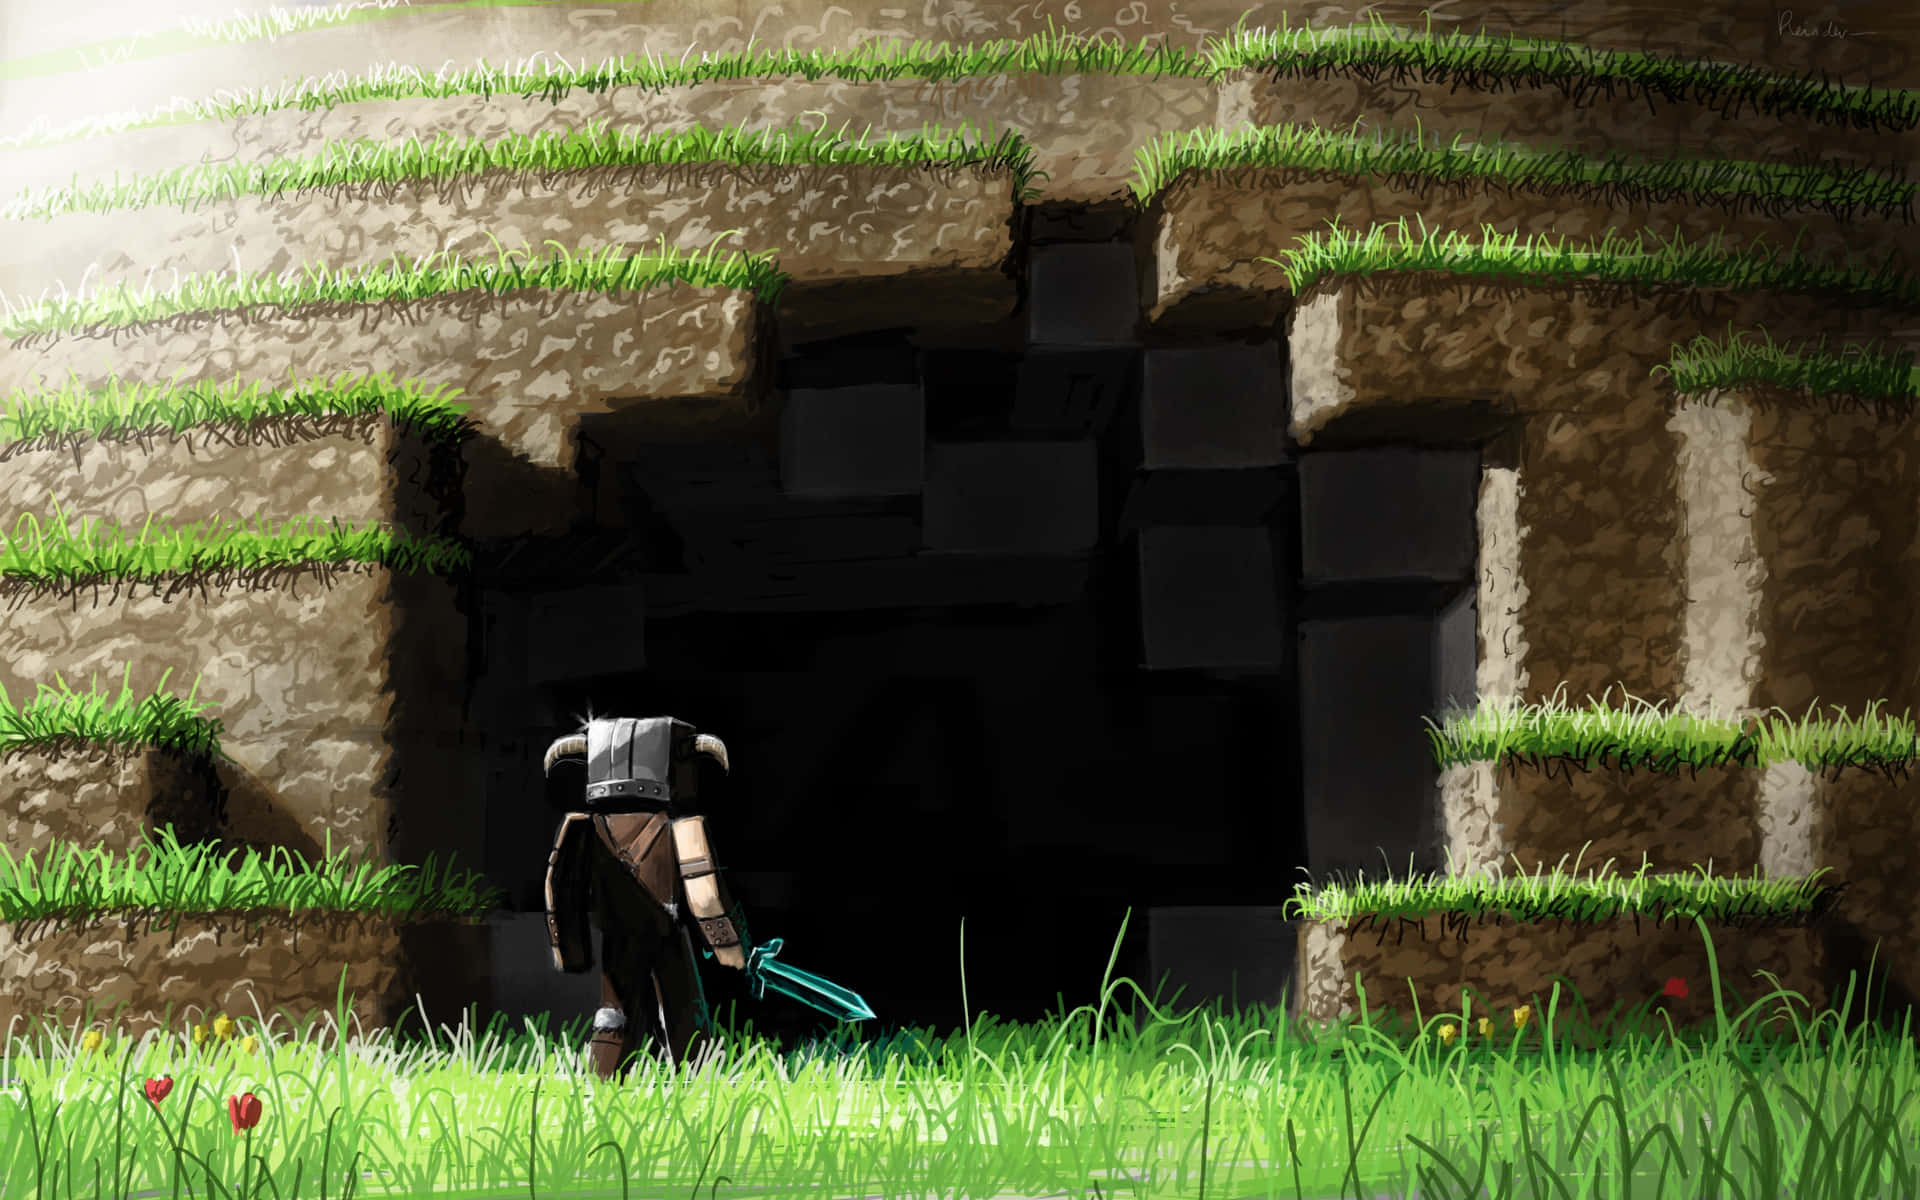 "Exploring The World Of Minecraft With A Pig Friend" Wallpaper